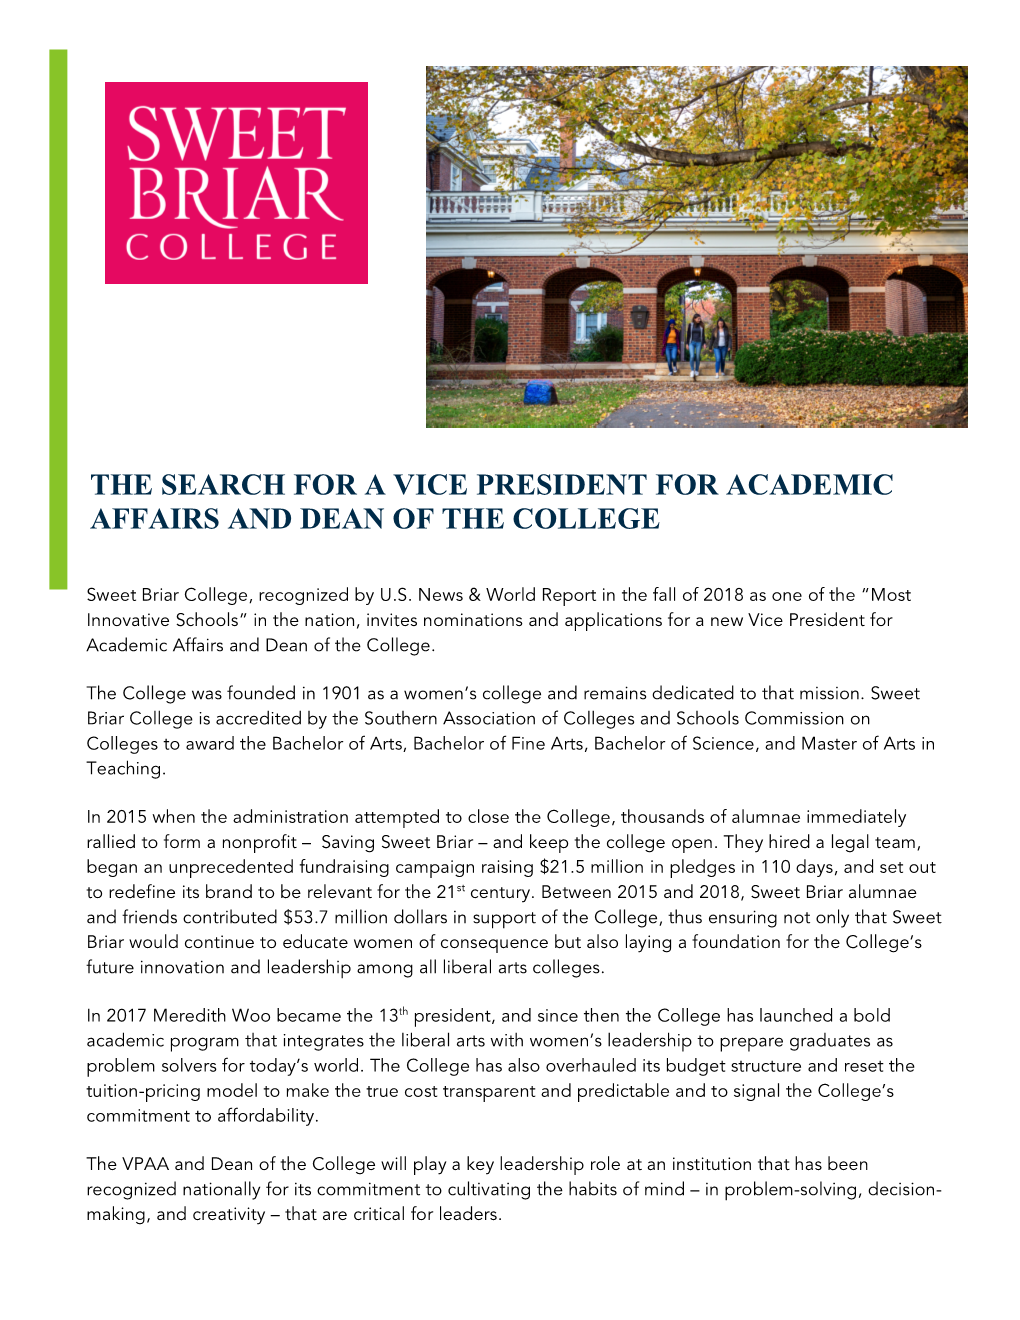 The Search for a Vice President for Academic Affairs and Dean of the College